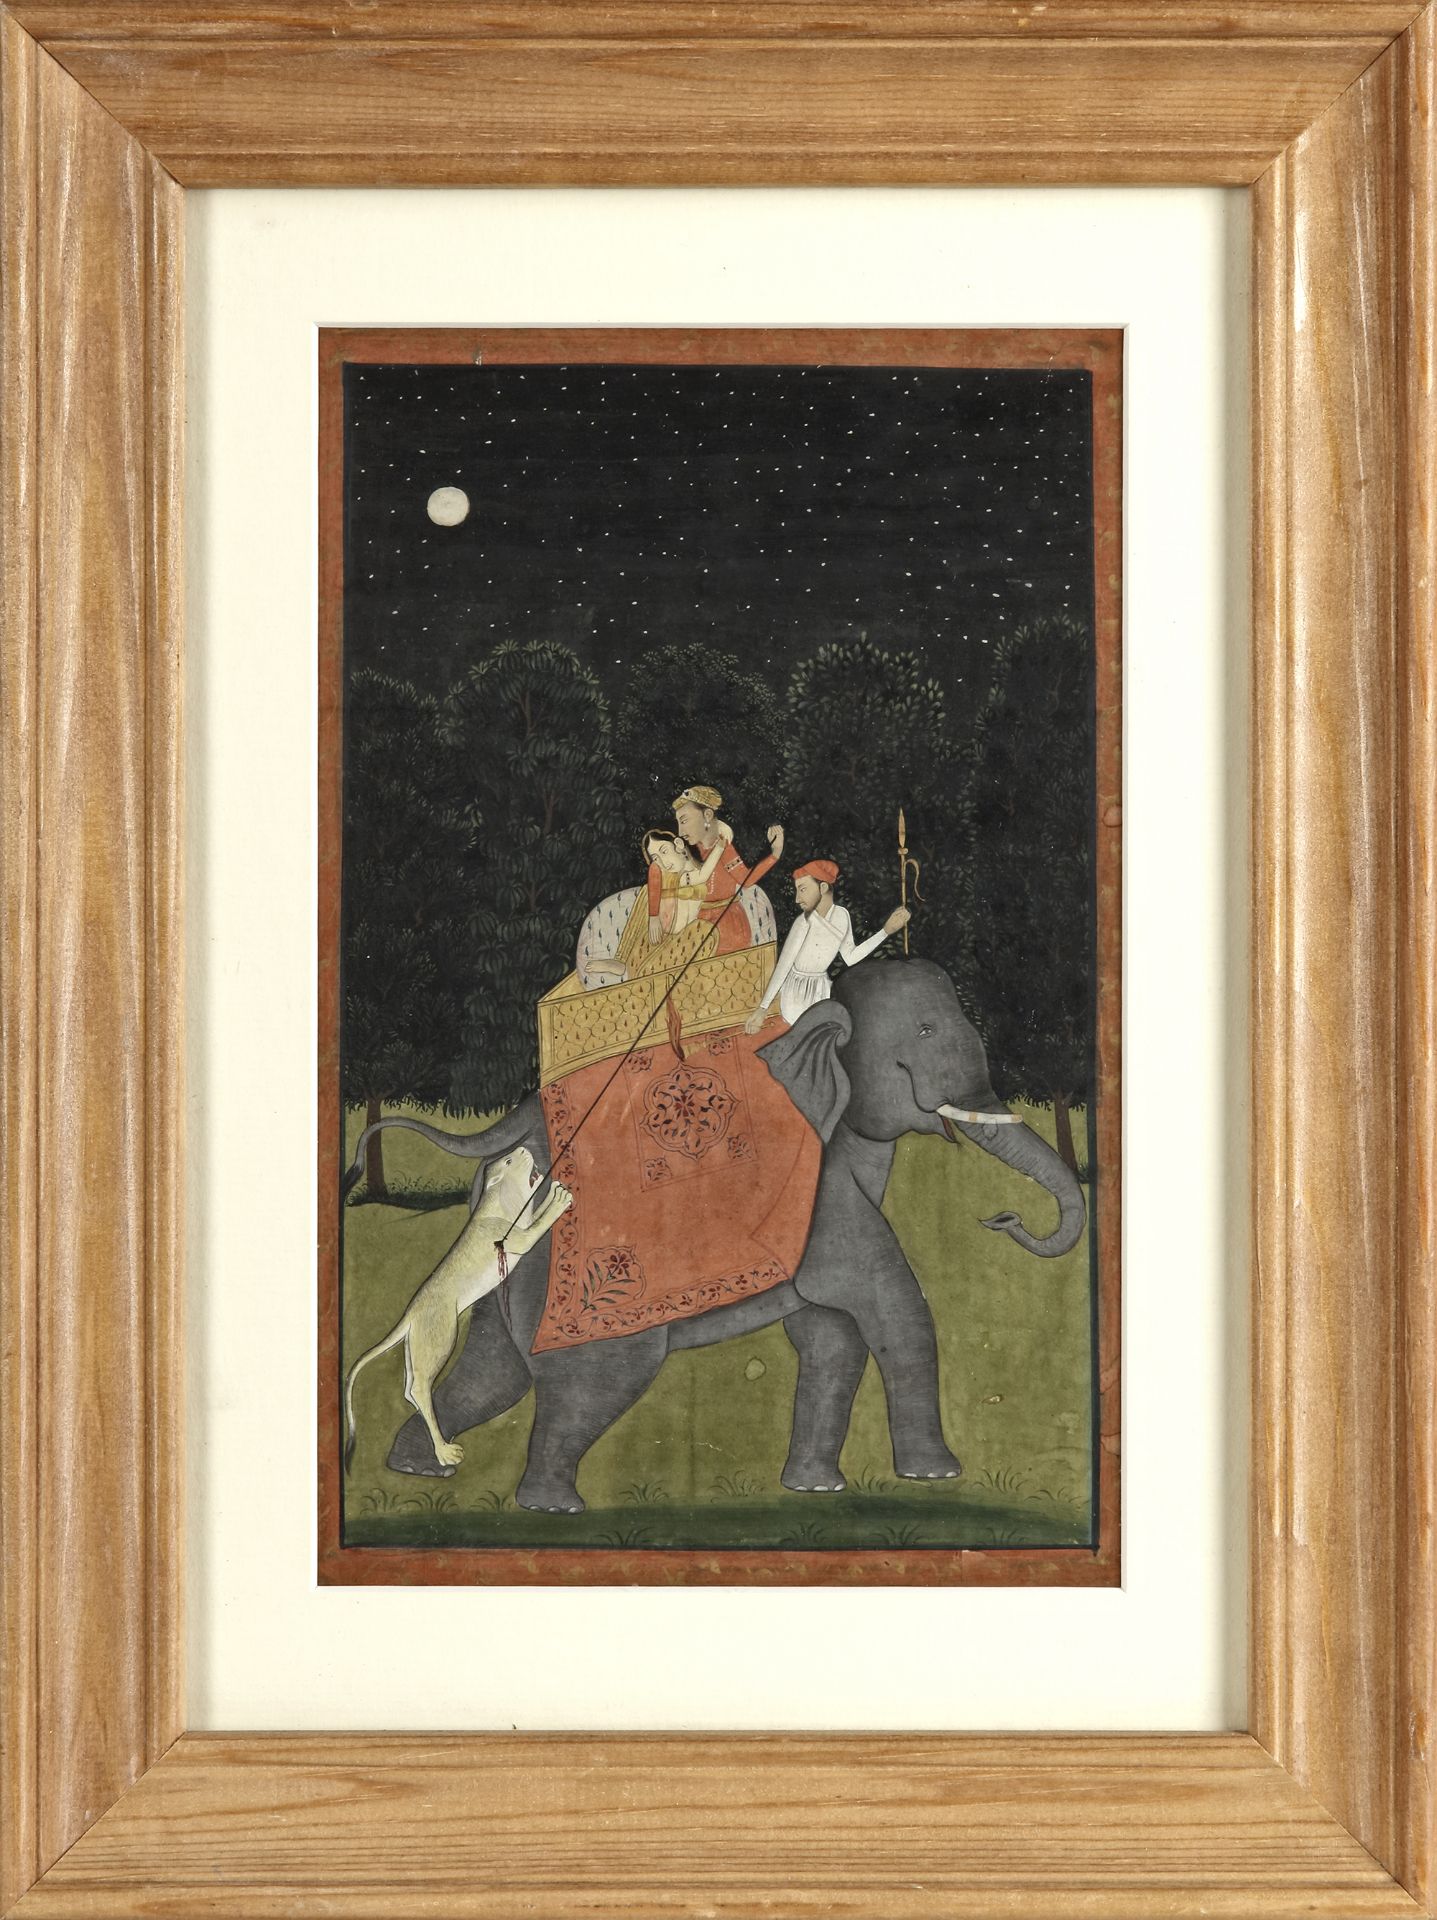 A PRINCE WITH HIS CONSORT HUNTING A LION, NORTH INDIA, 19TH CENTURY